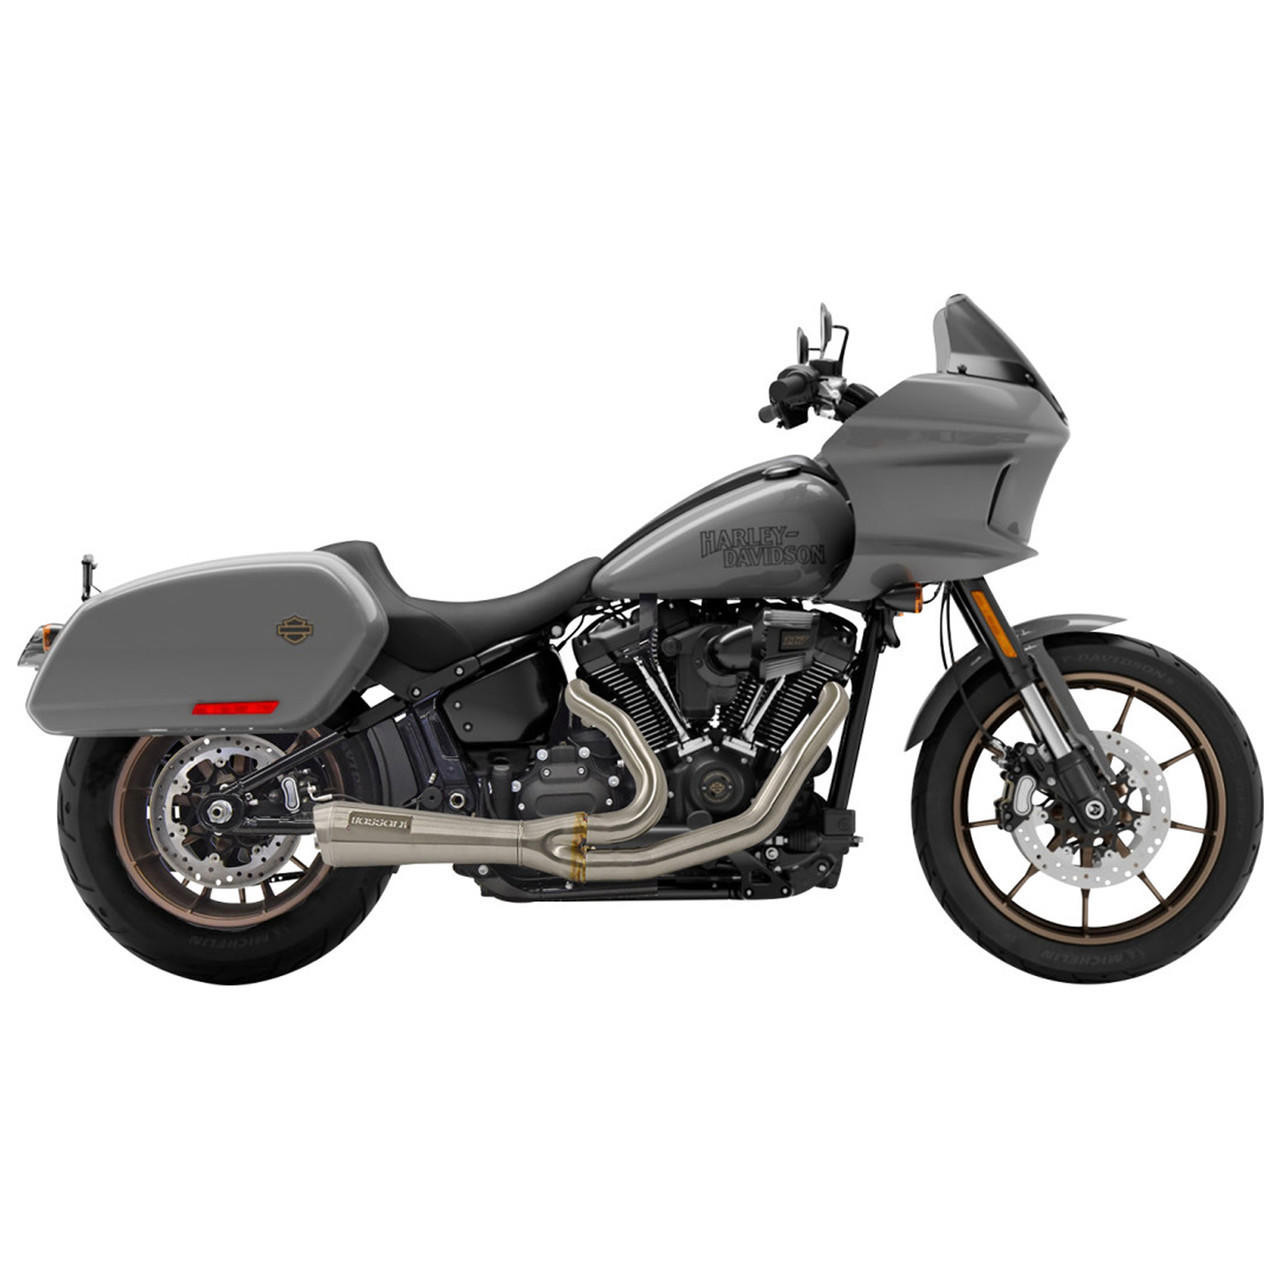 Bassani - Ripper 2-into-1 Stainless Steel Short Exhaust System fits '22-'23  FXLRST & '18-Up FLSB Models